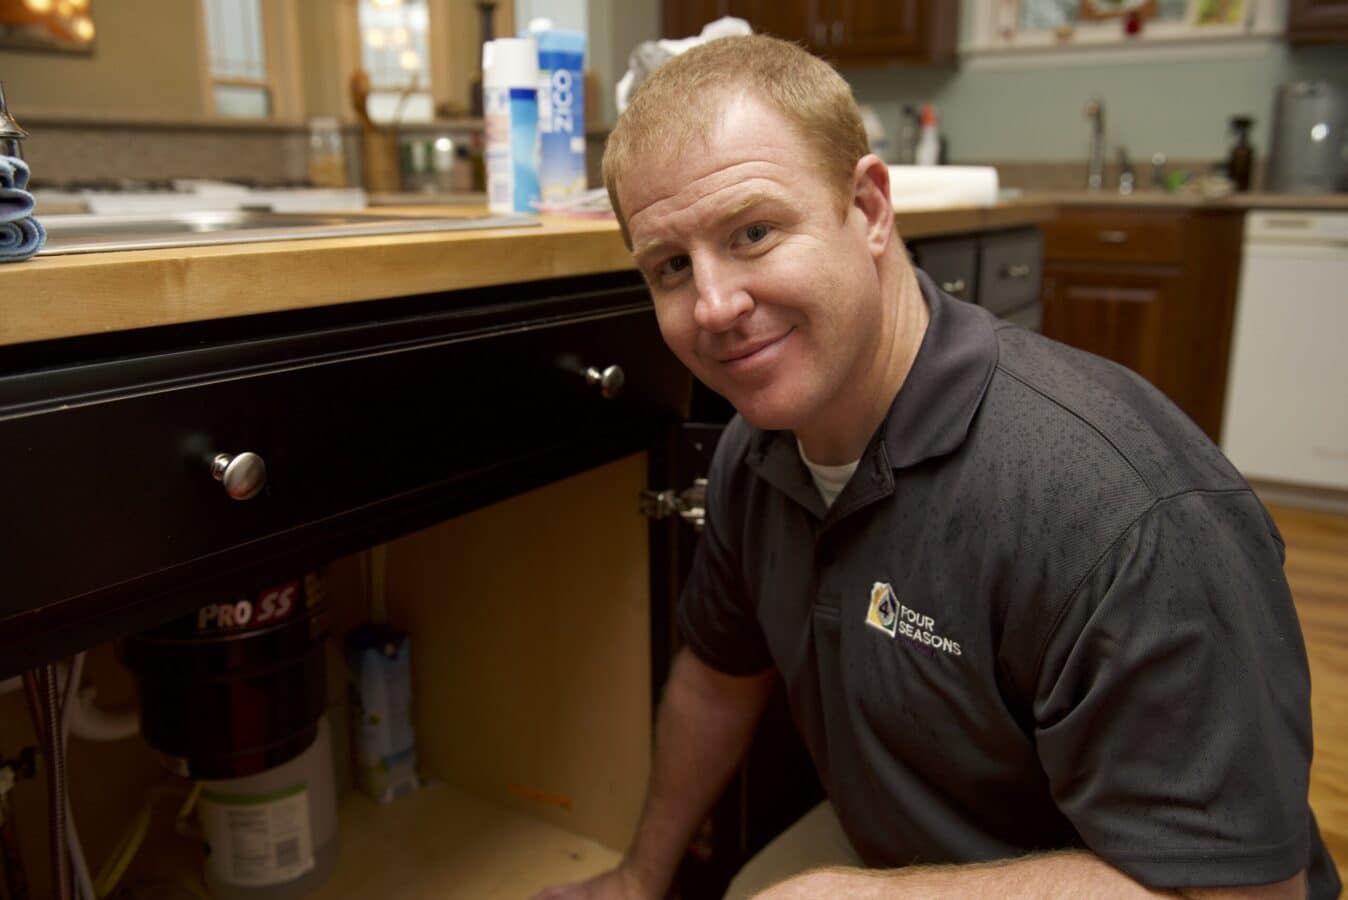 What Are the Signs Your Hot Water Heater Is Going Out?